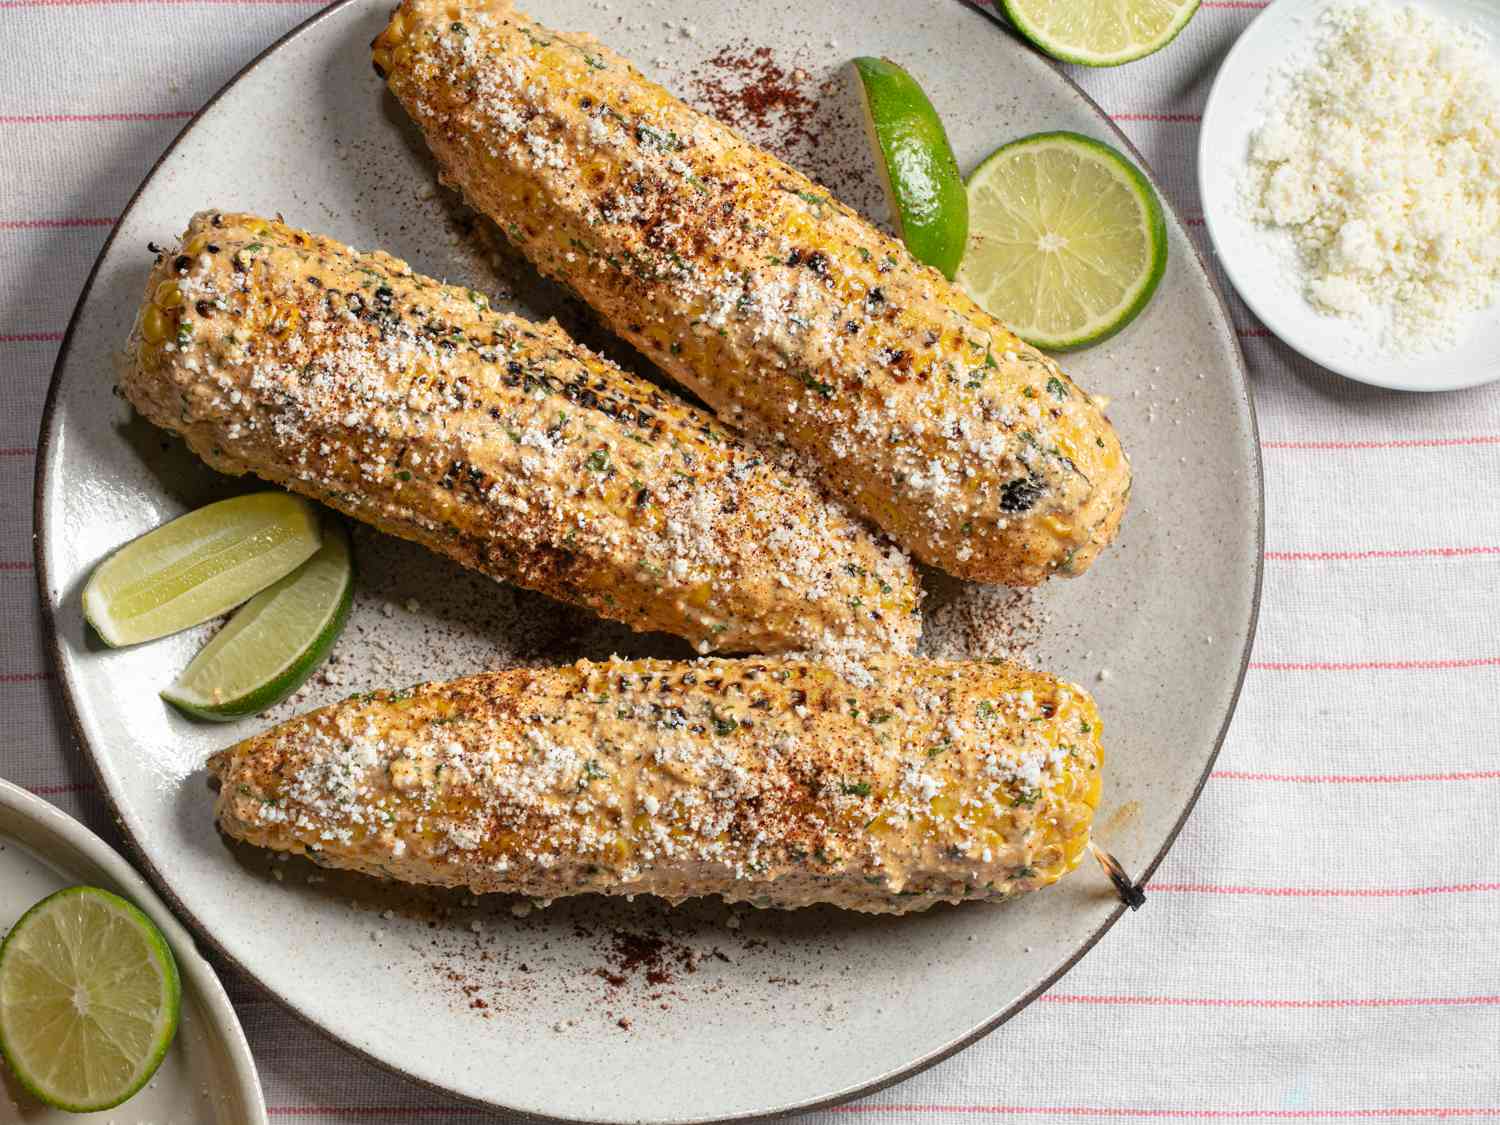 Elotes (grilled Mexican street corn) on a plate with limes and chili powder